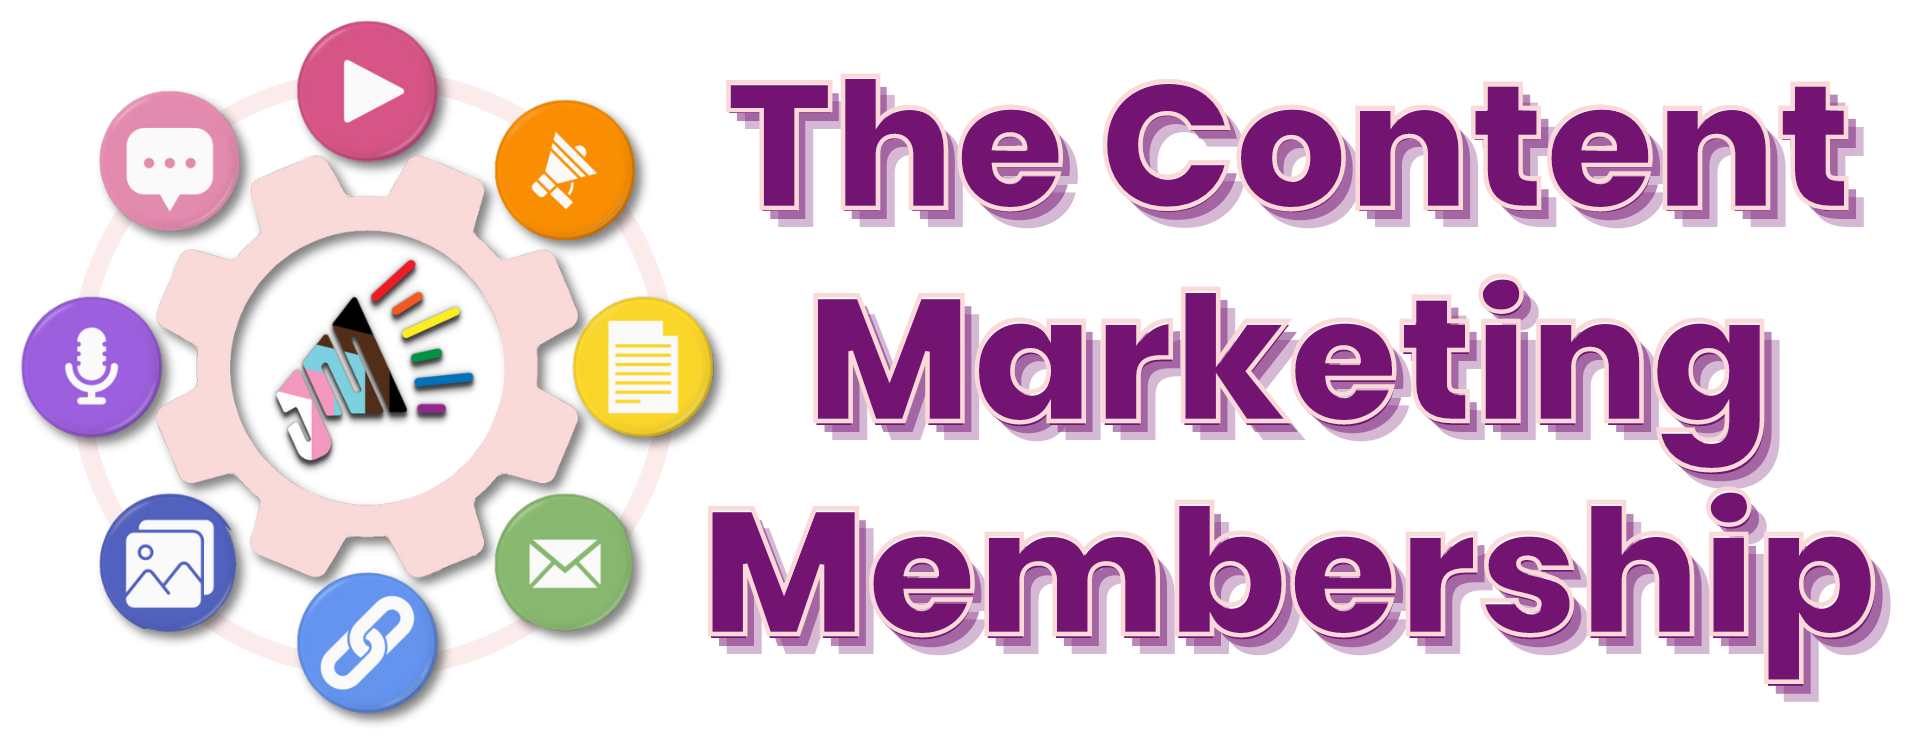 The Content Marketing Membership. A gear has the Just Marketing® logo in the center. Icons representing different content types surround the gear: video, audio written, email, links, images, social media, etc.